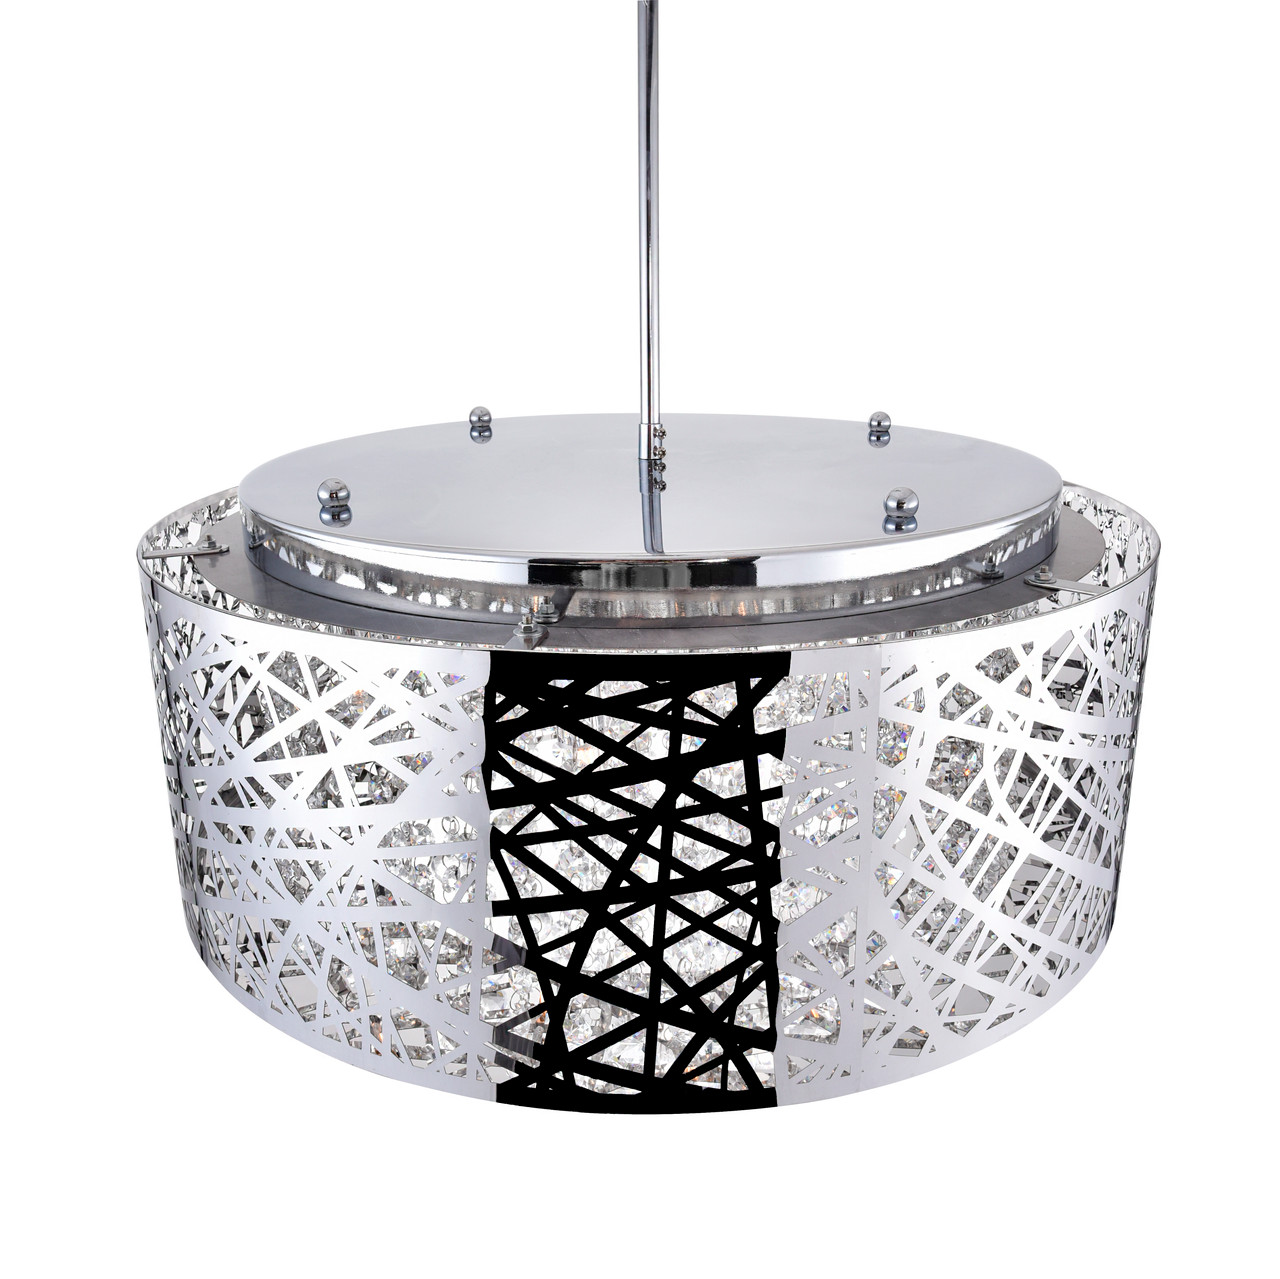 CWI LIGHTING 5008P22ST-R 9 Light Drum Shade Chandelier with Chrome finish